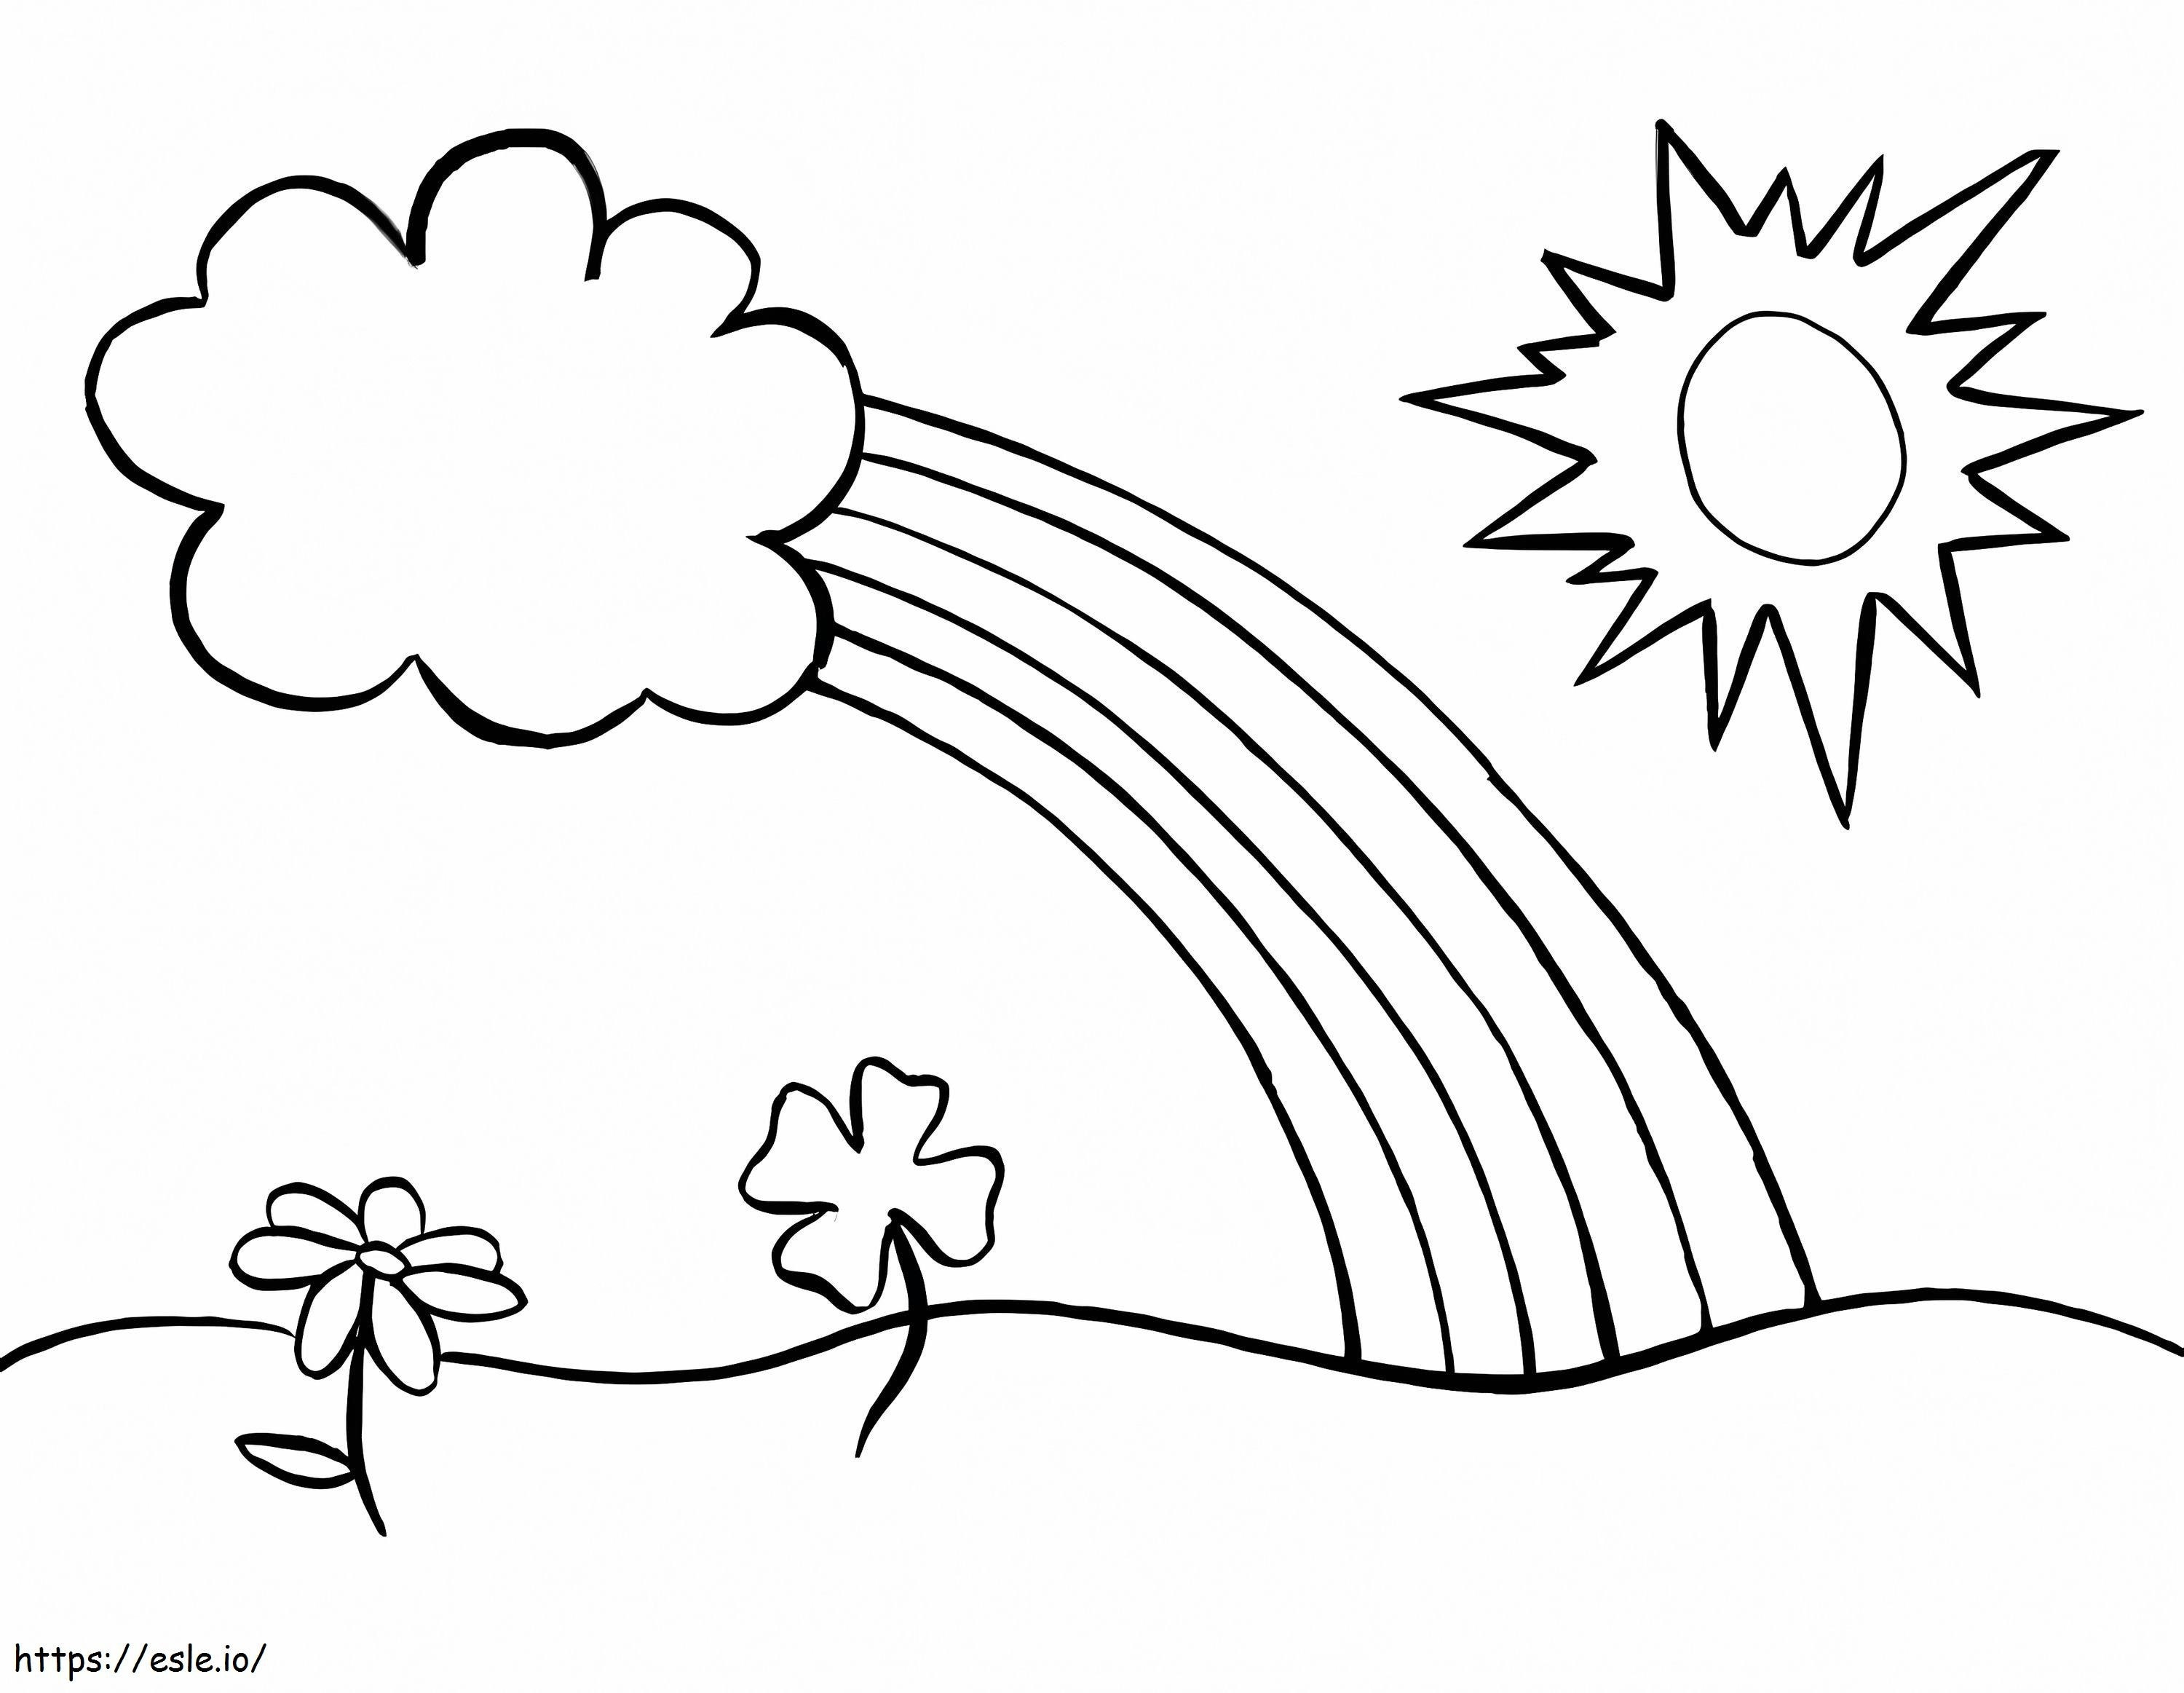 Rainbow Coloring Page 6 coloring page